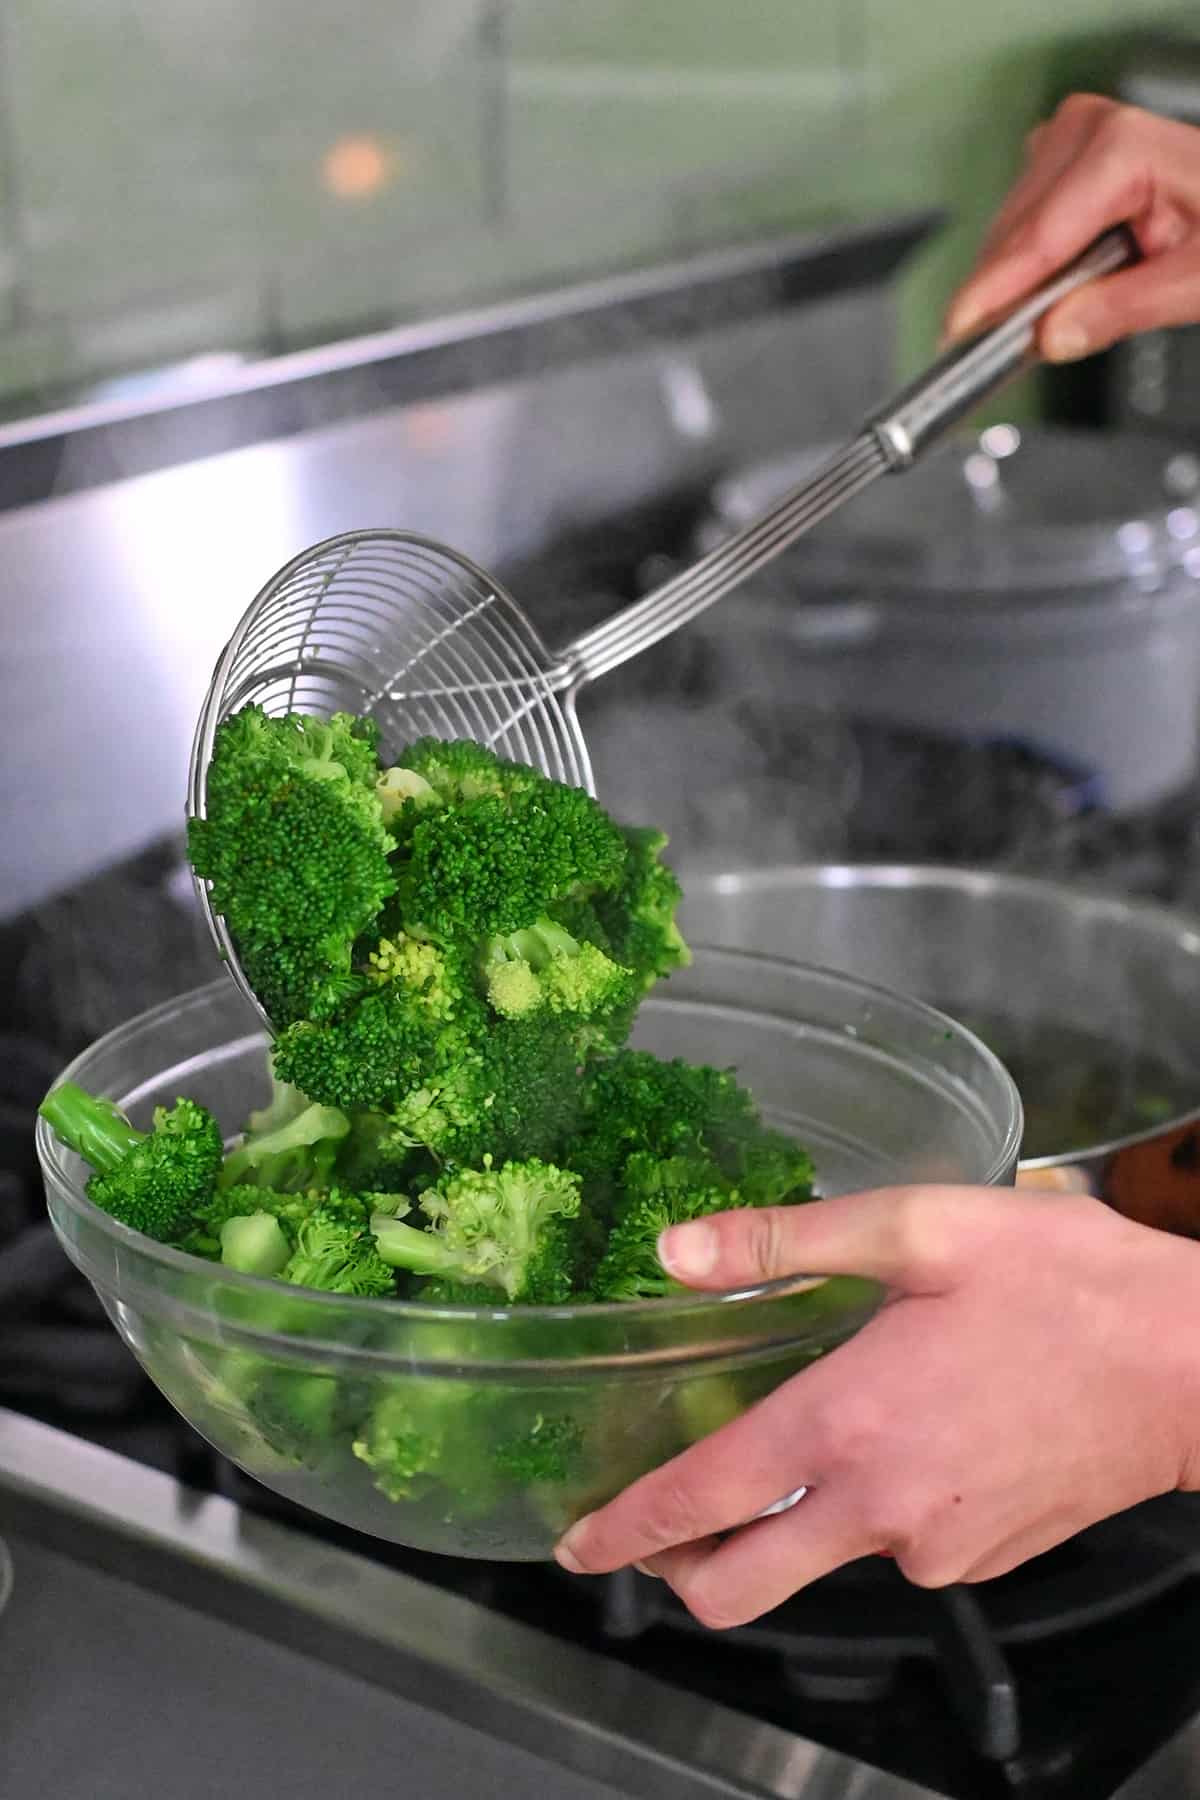 A metal sieve is being used to transfer cooked broccoli from a pot of boiling water to a clear class bowl.